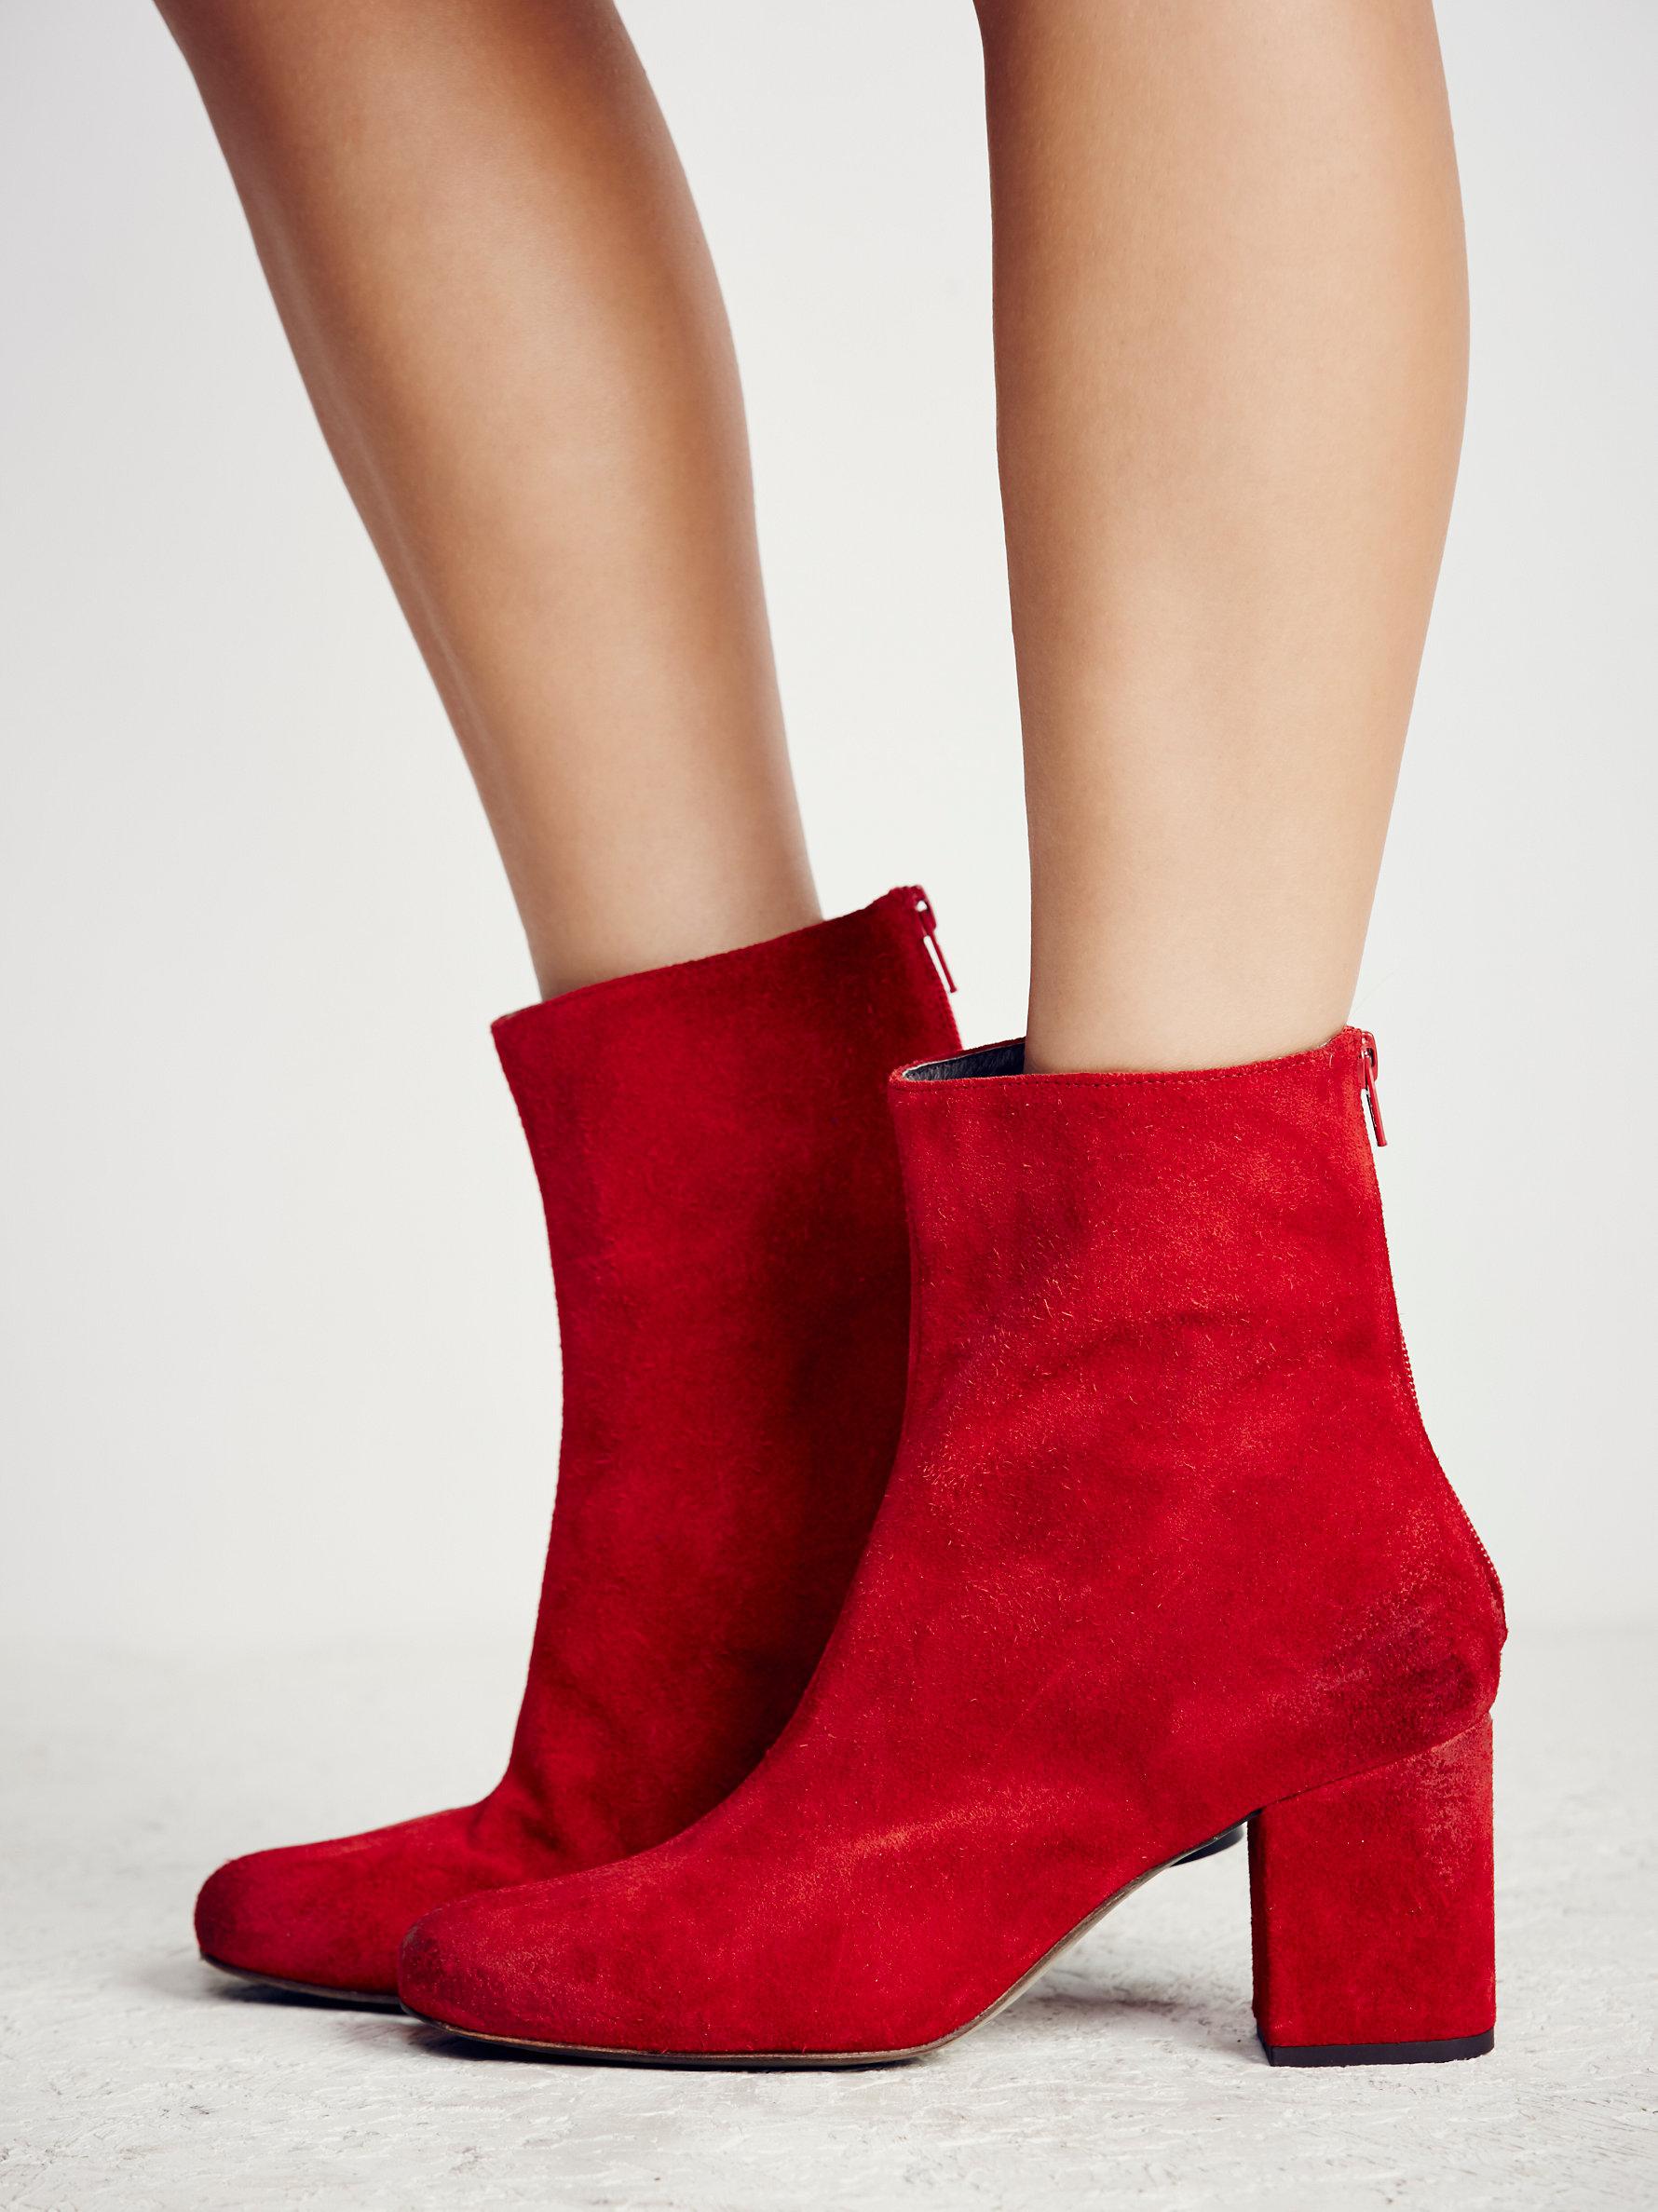 Lyst - Free people Cecile Ankle Boot in Red